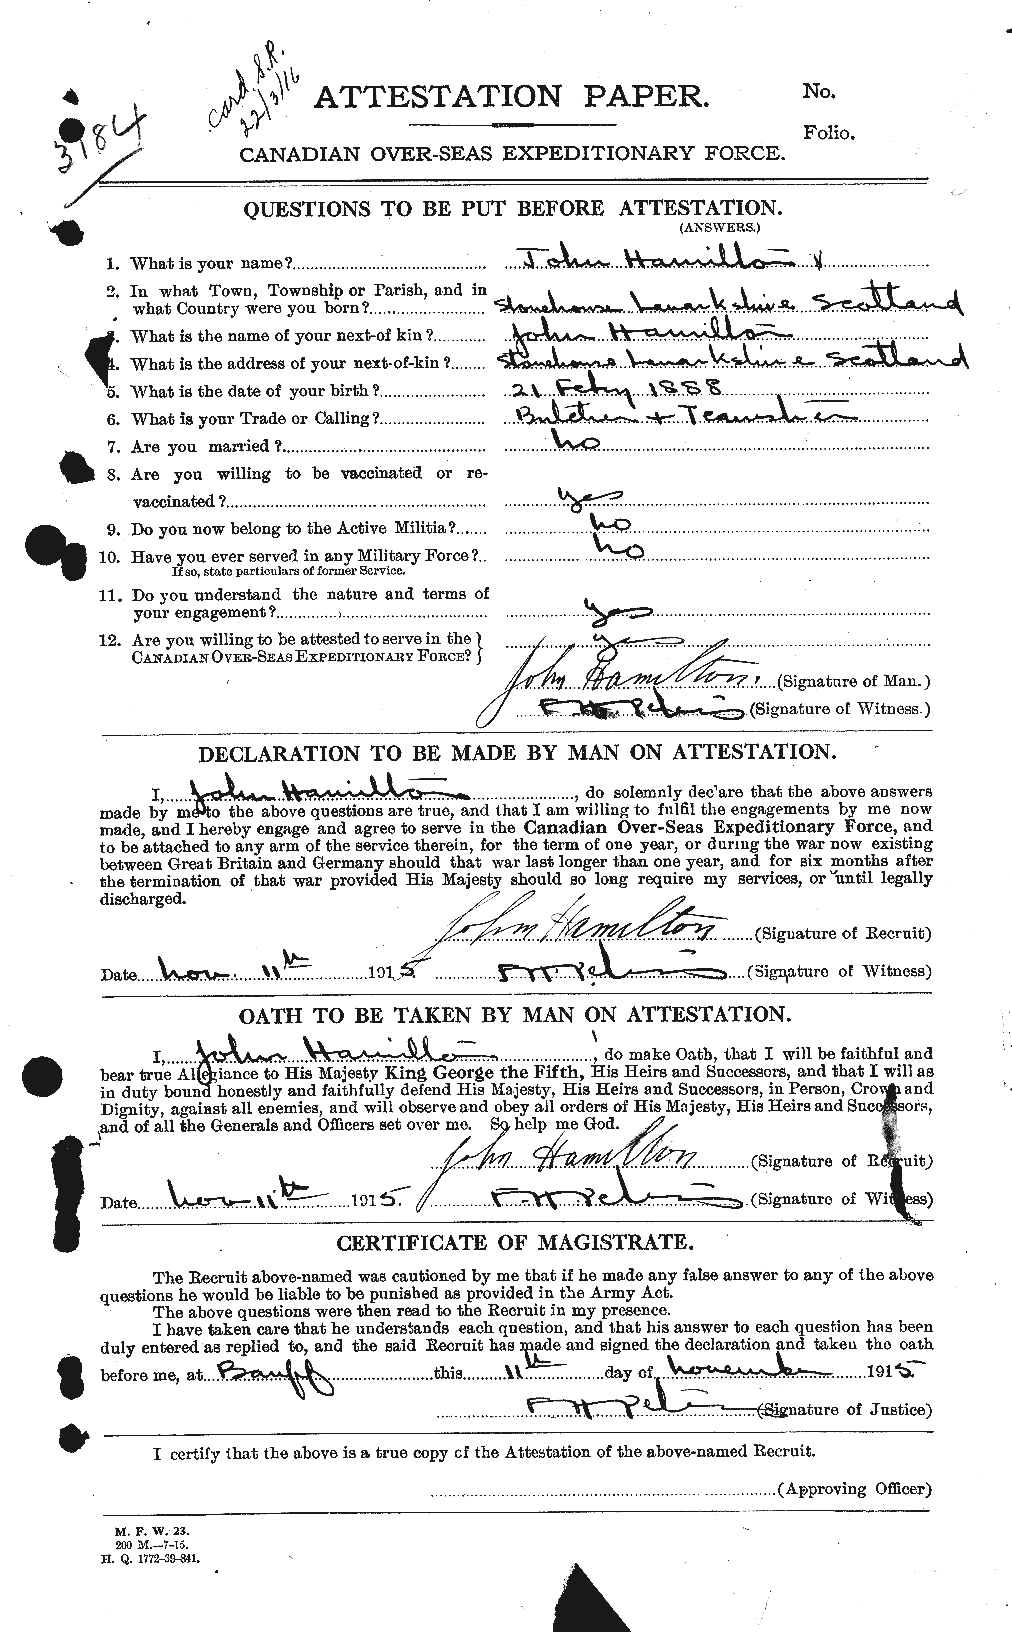 Personnel Records of the First World War - CEF 373022a